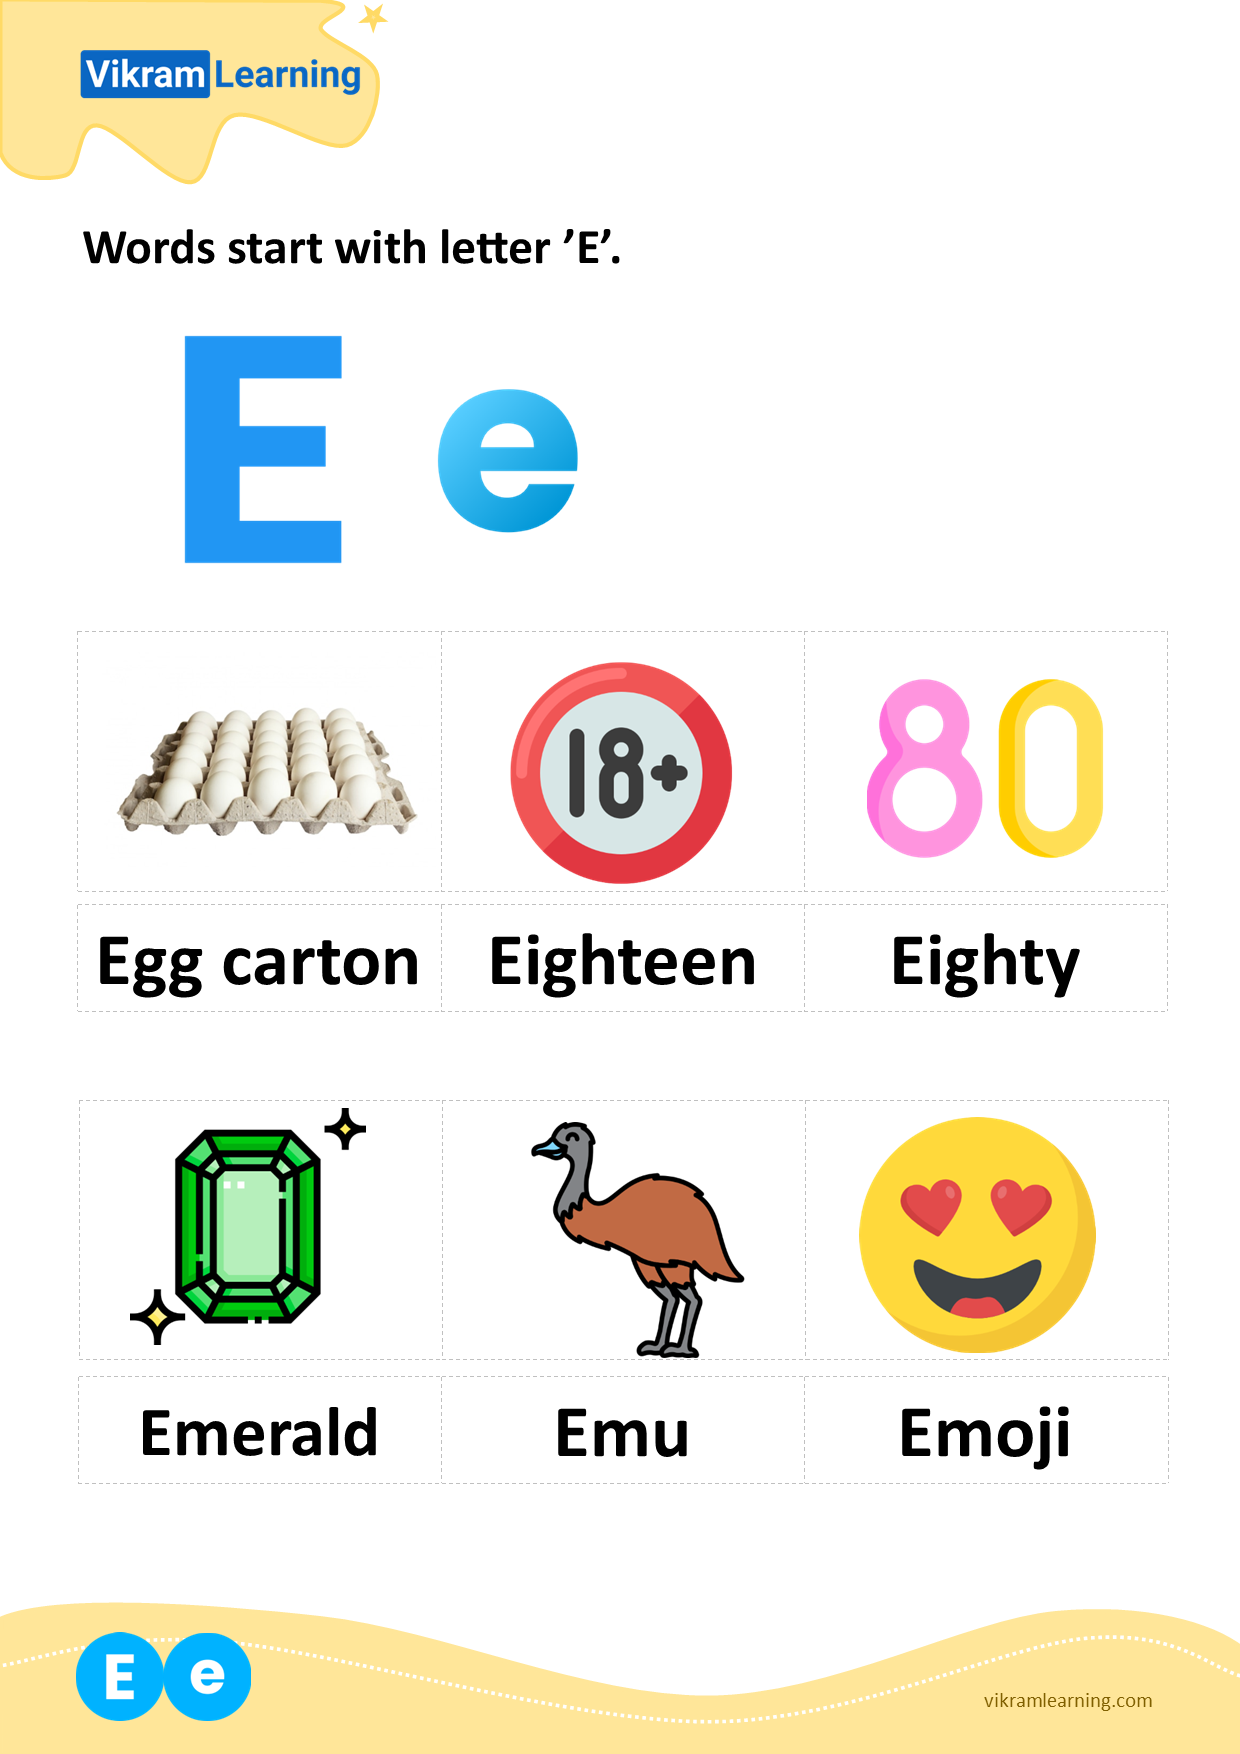 Download words start with letter 'e' worksheets